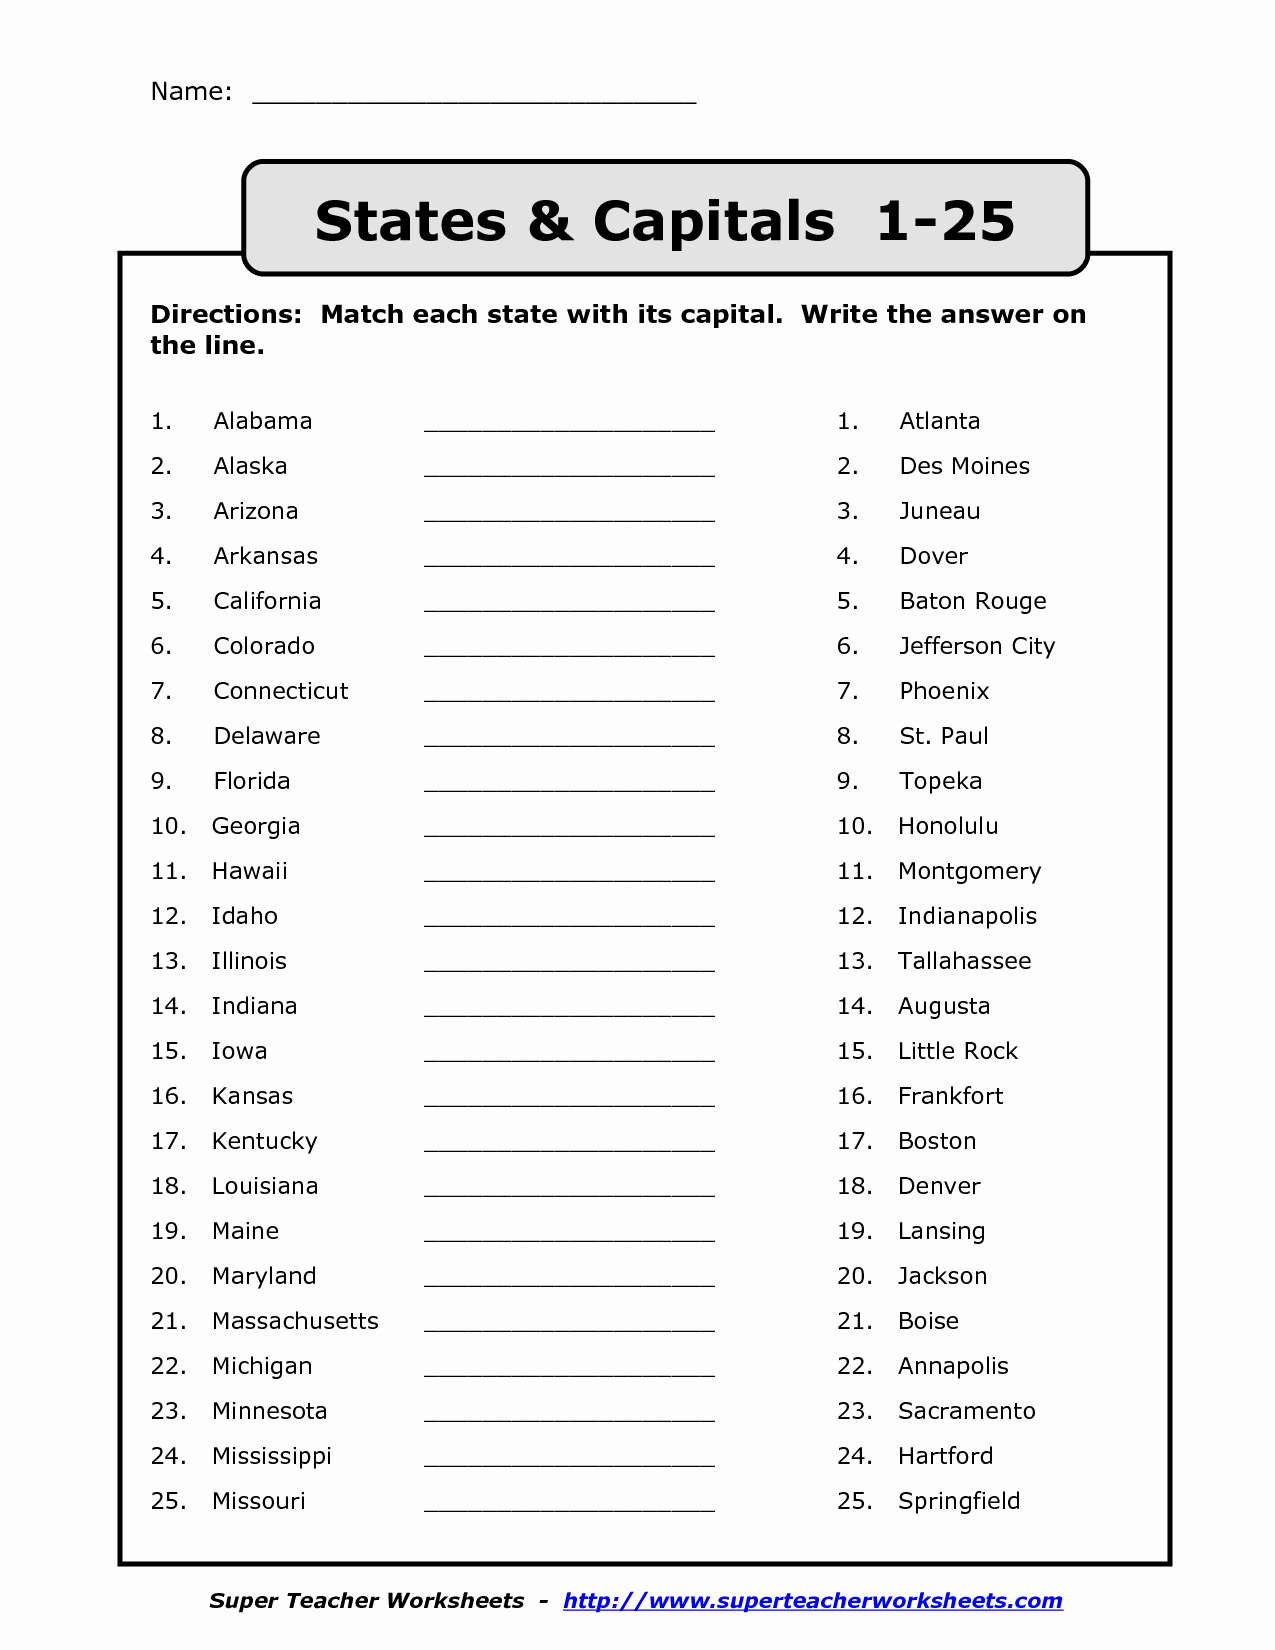 States and Capitals Matching Worksheet New Name States Capitals 1 25 Directions Match Each State with